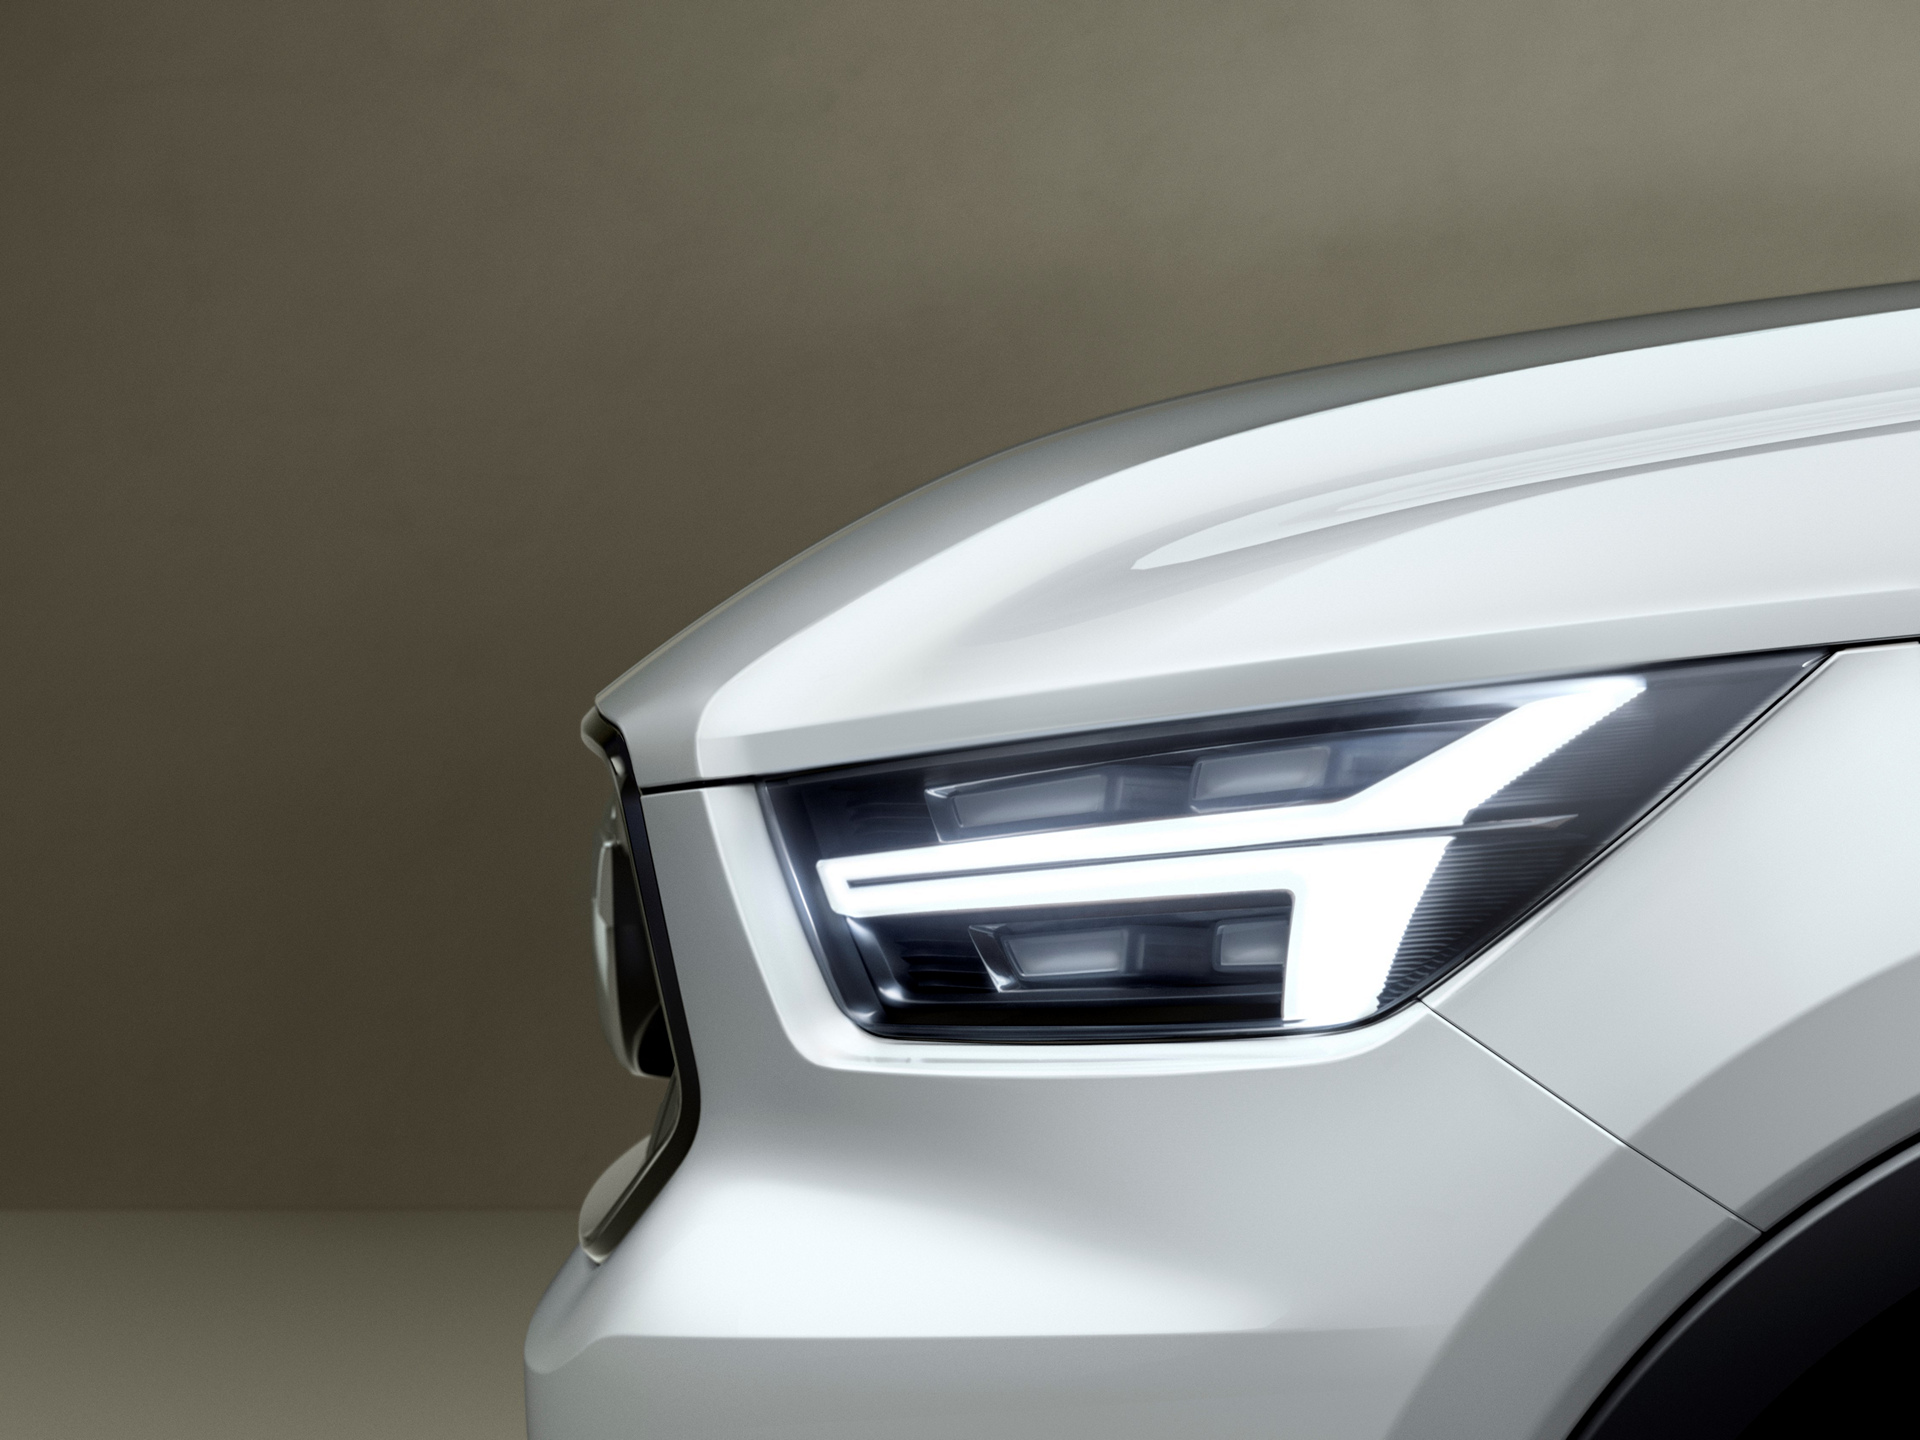 Volvo Concept 40.1 © Zhejiang Geely Holding Group Co., Ltd